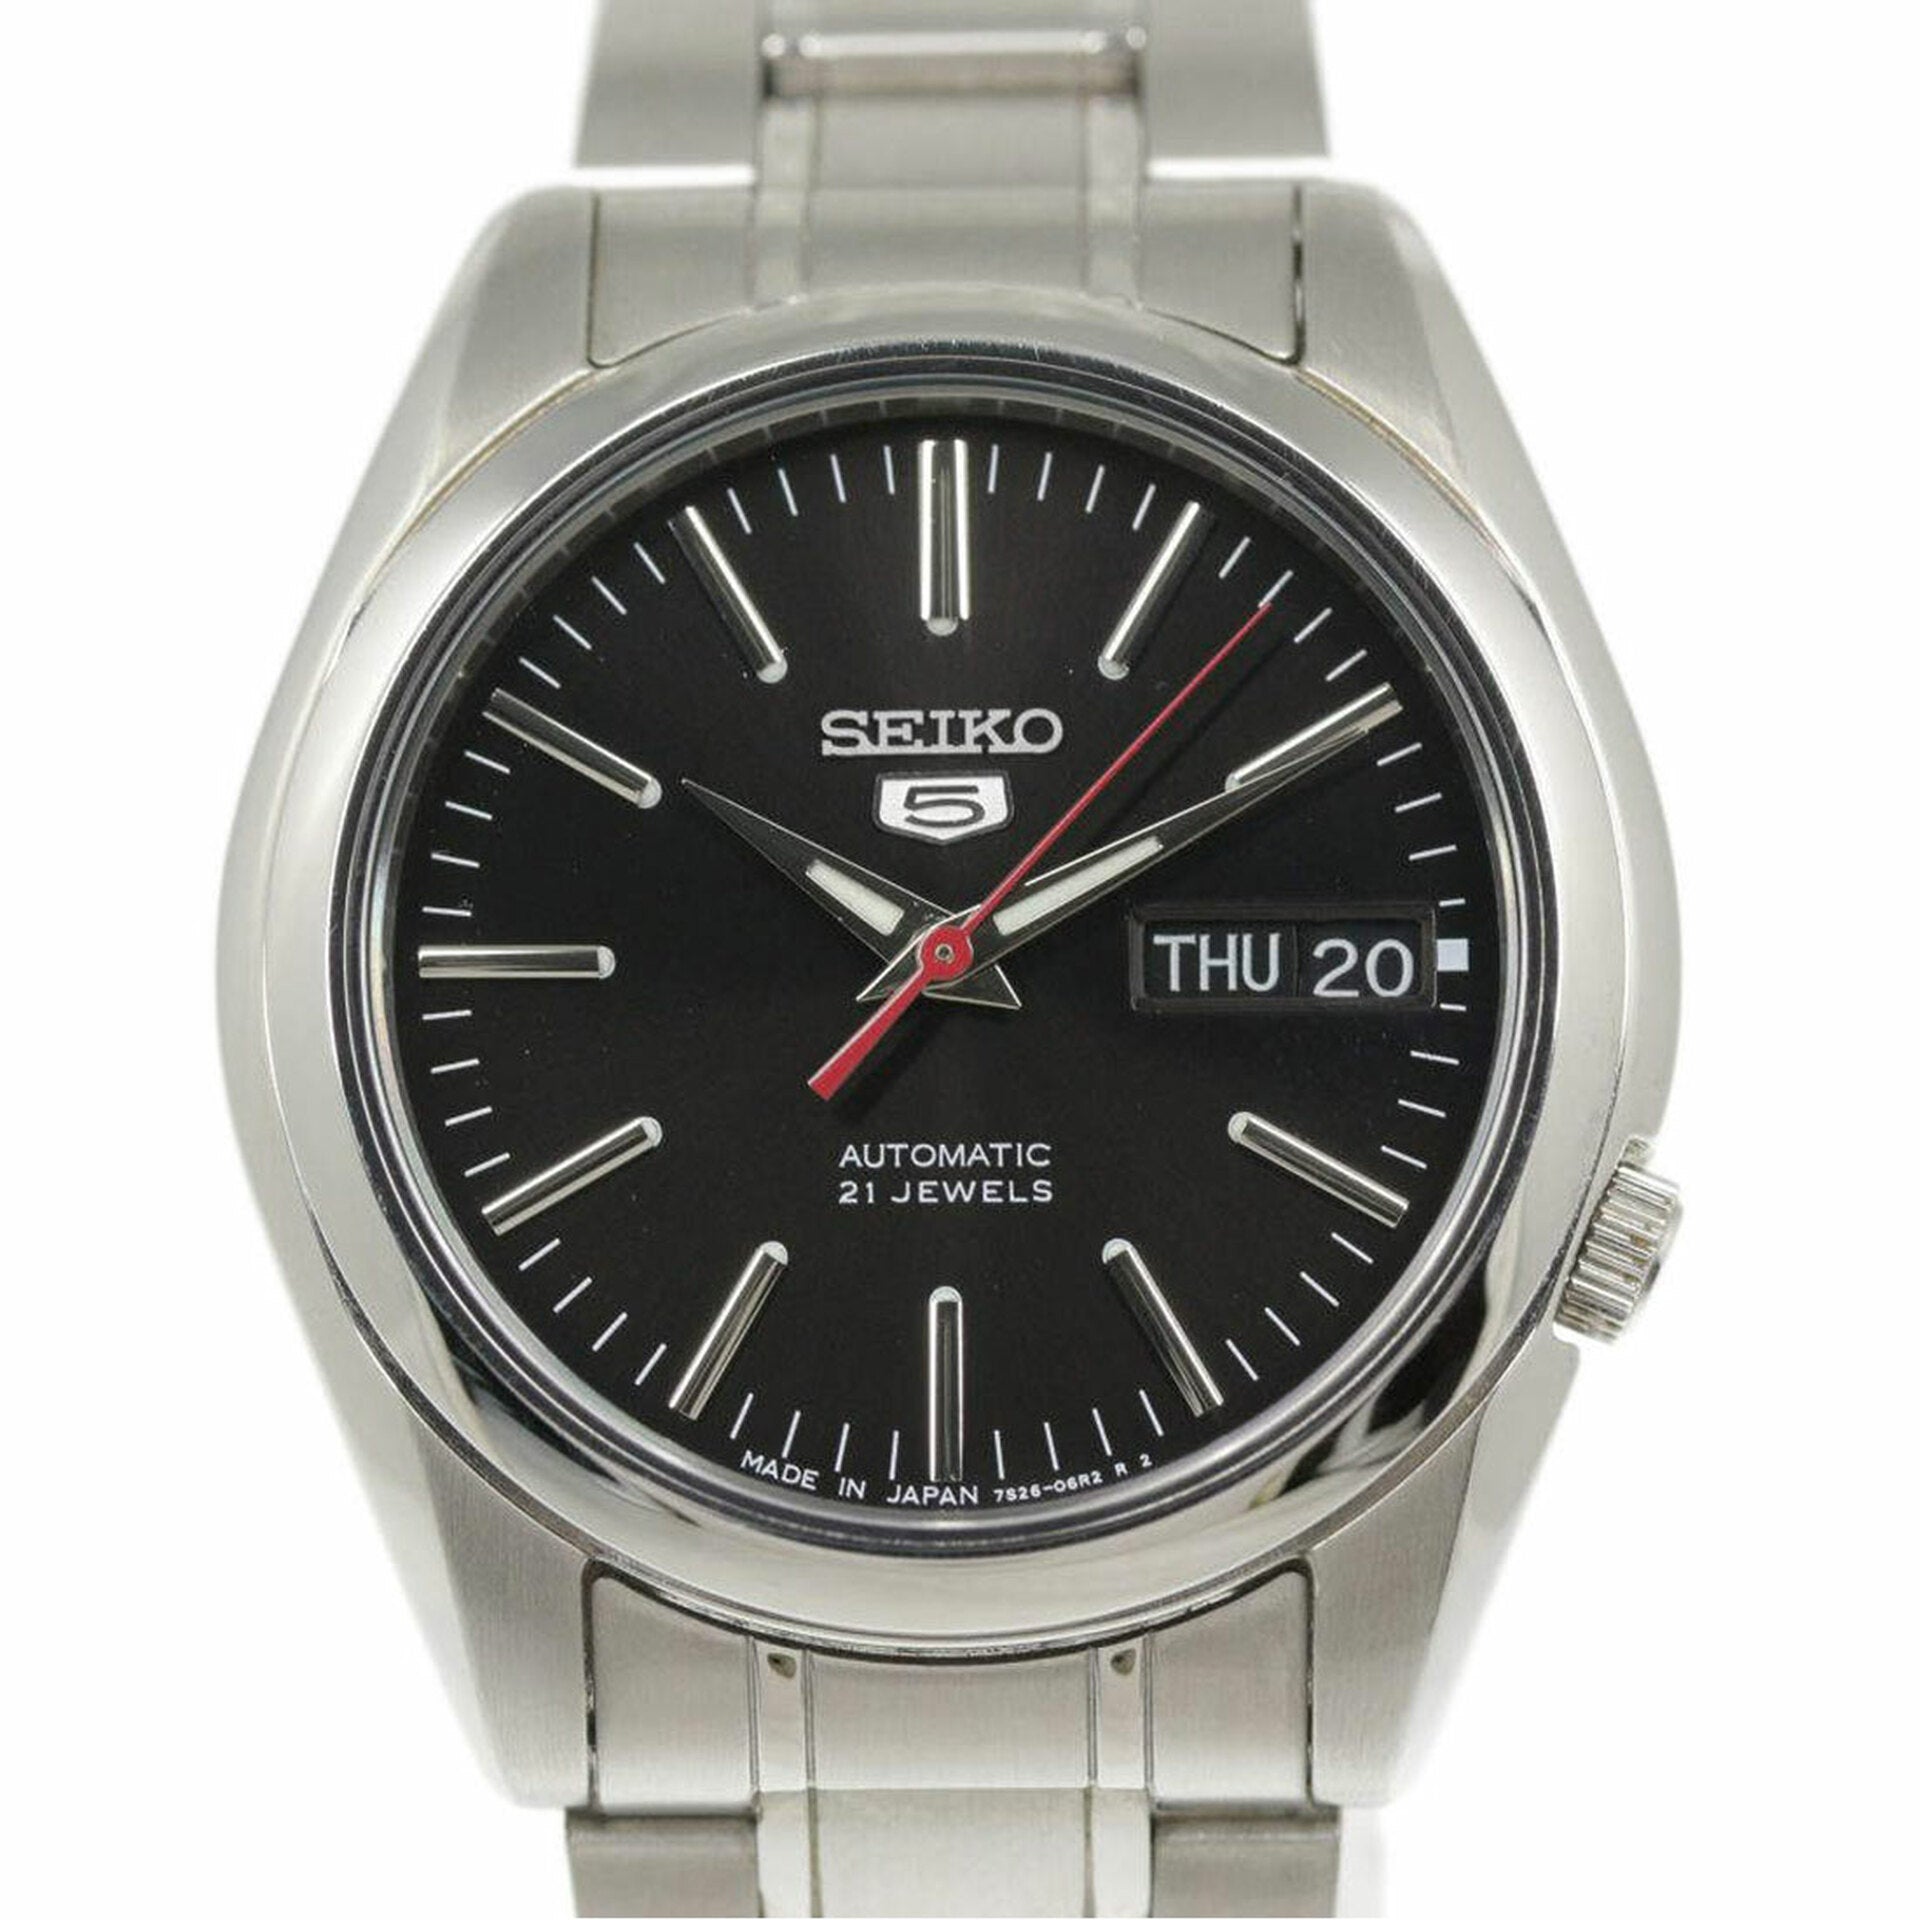 Seiko 5 Automatic Made in Japan Watch